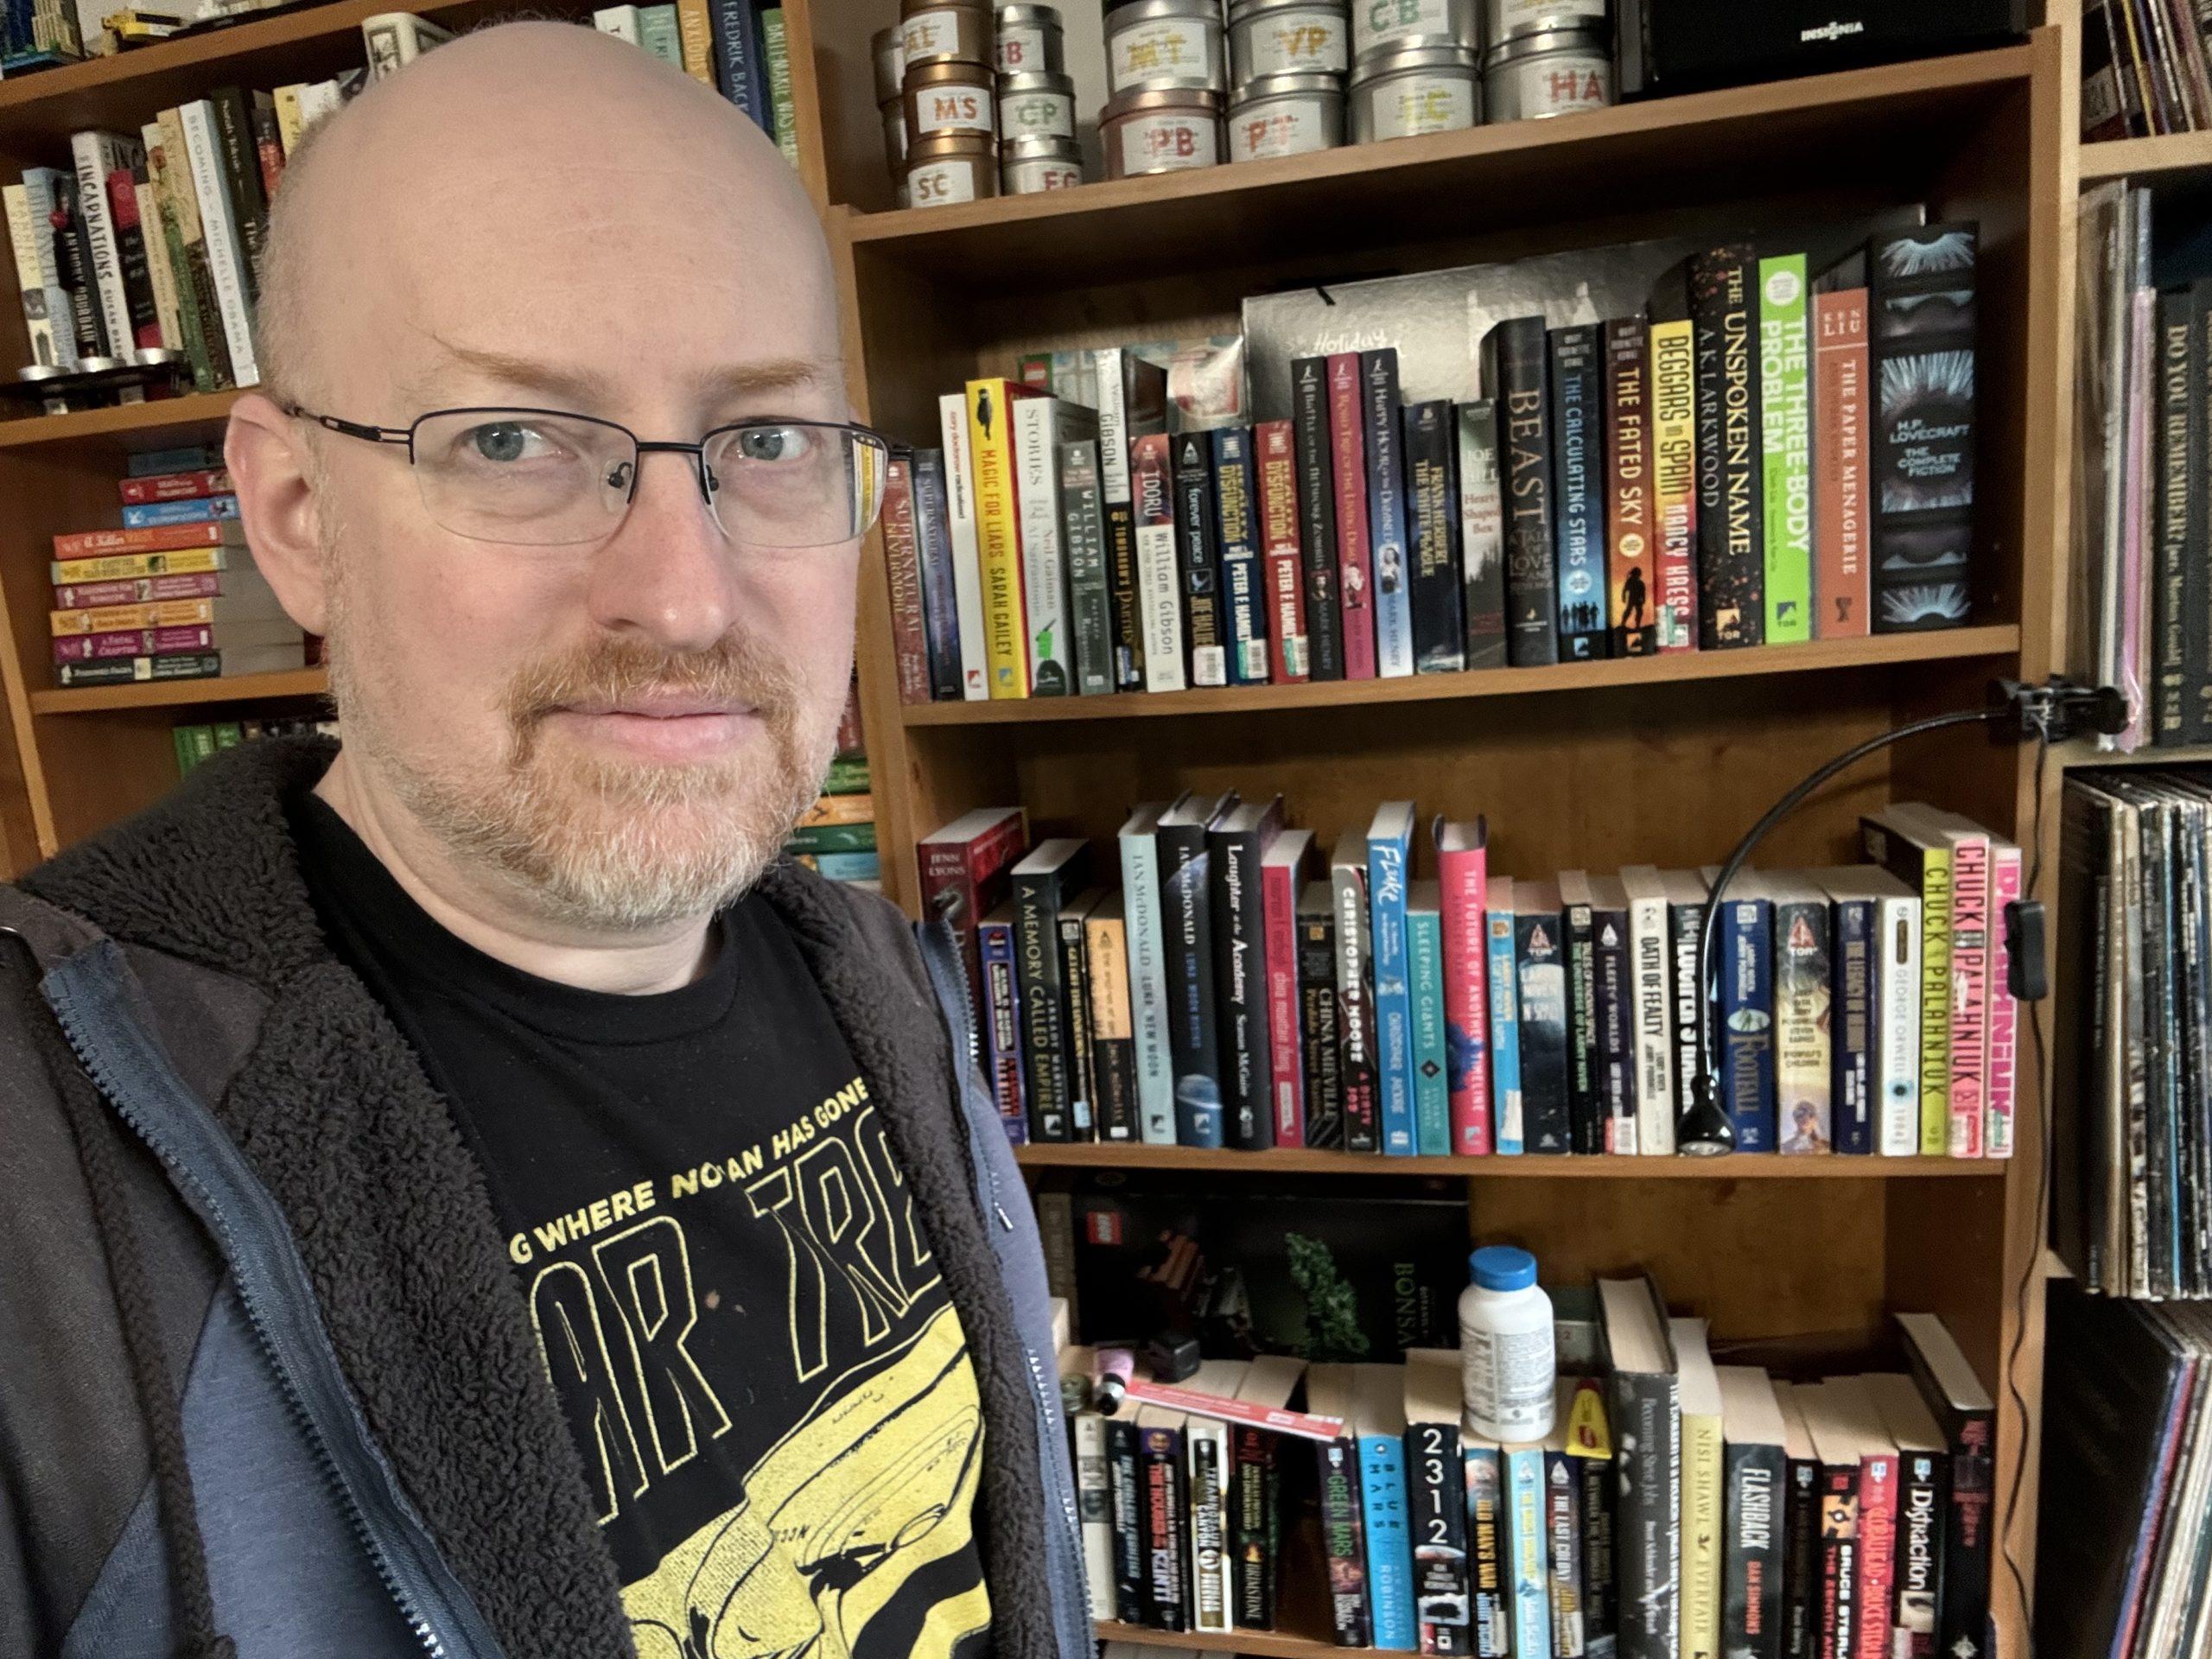 Me standing in front of a bookcase full of science fiction books.